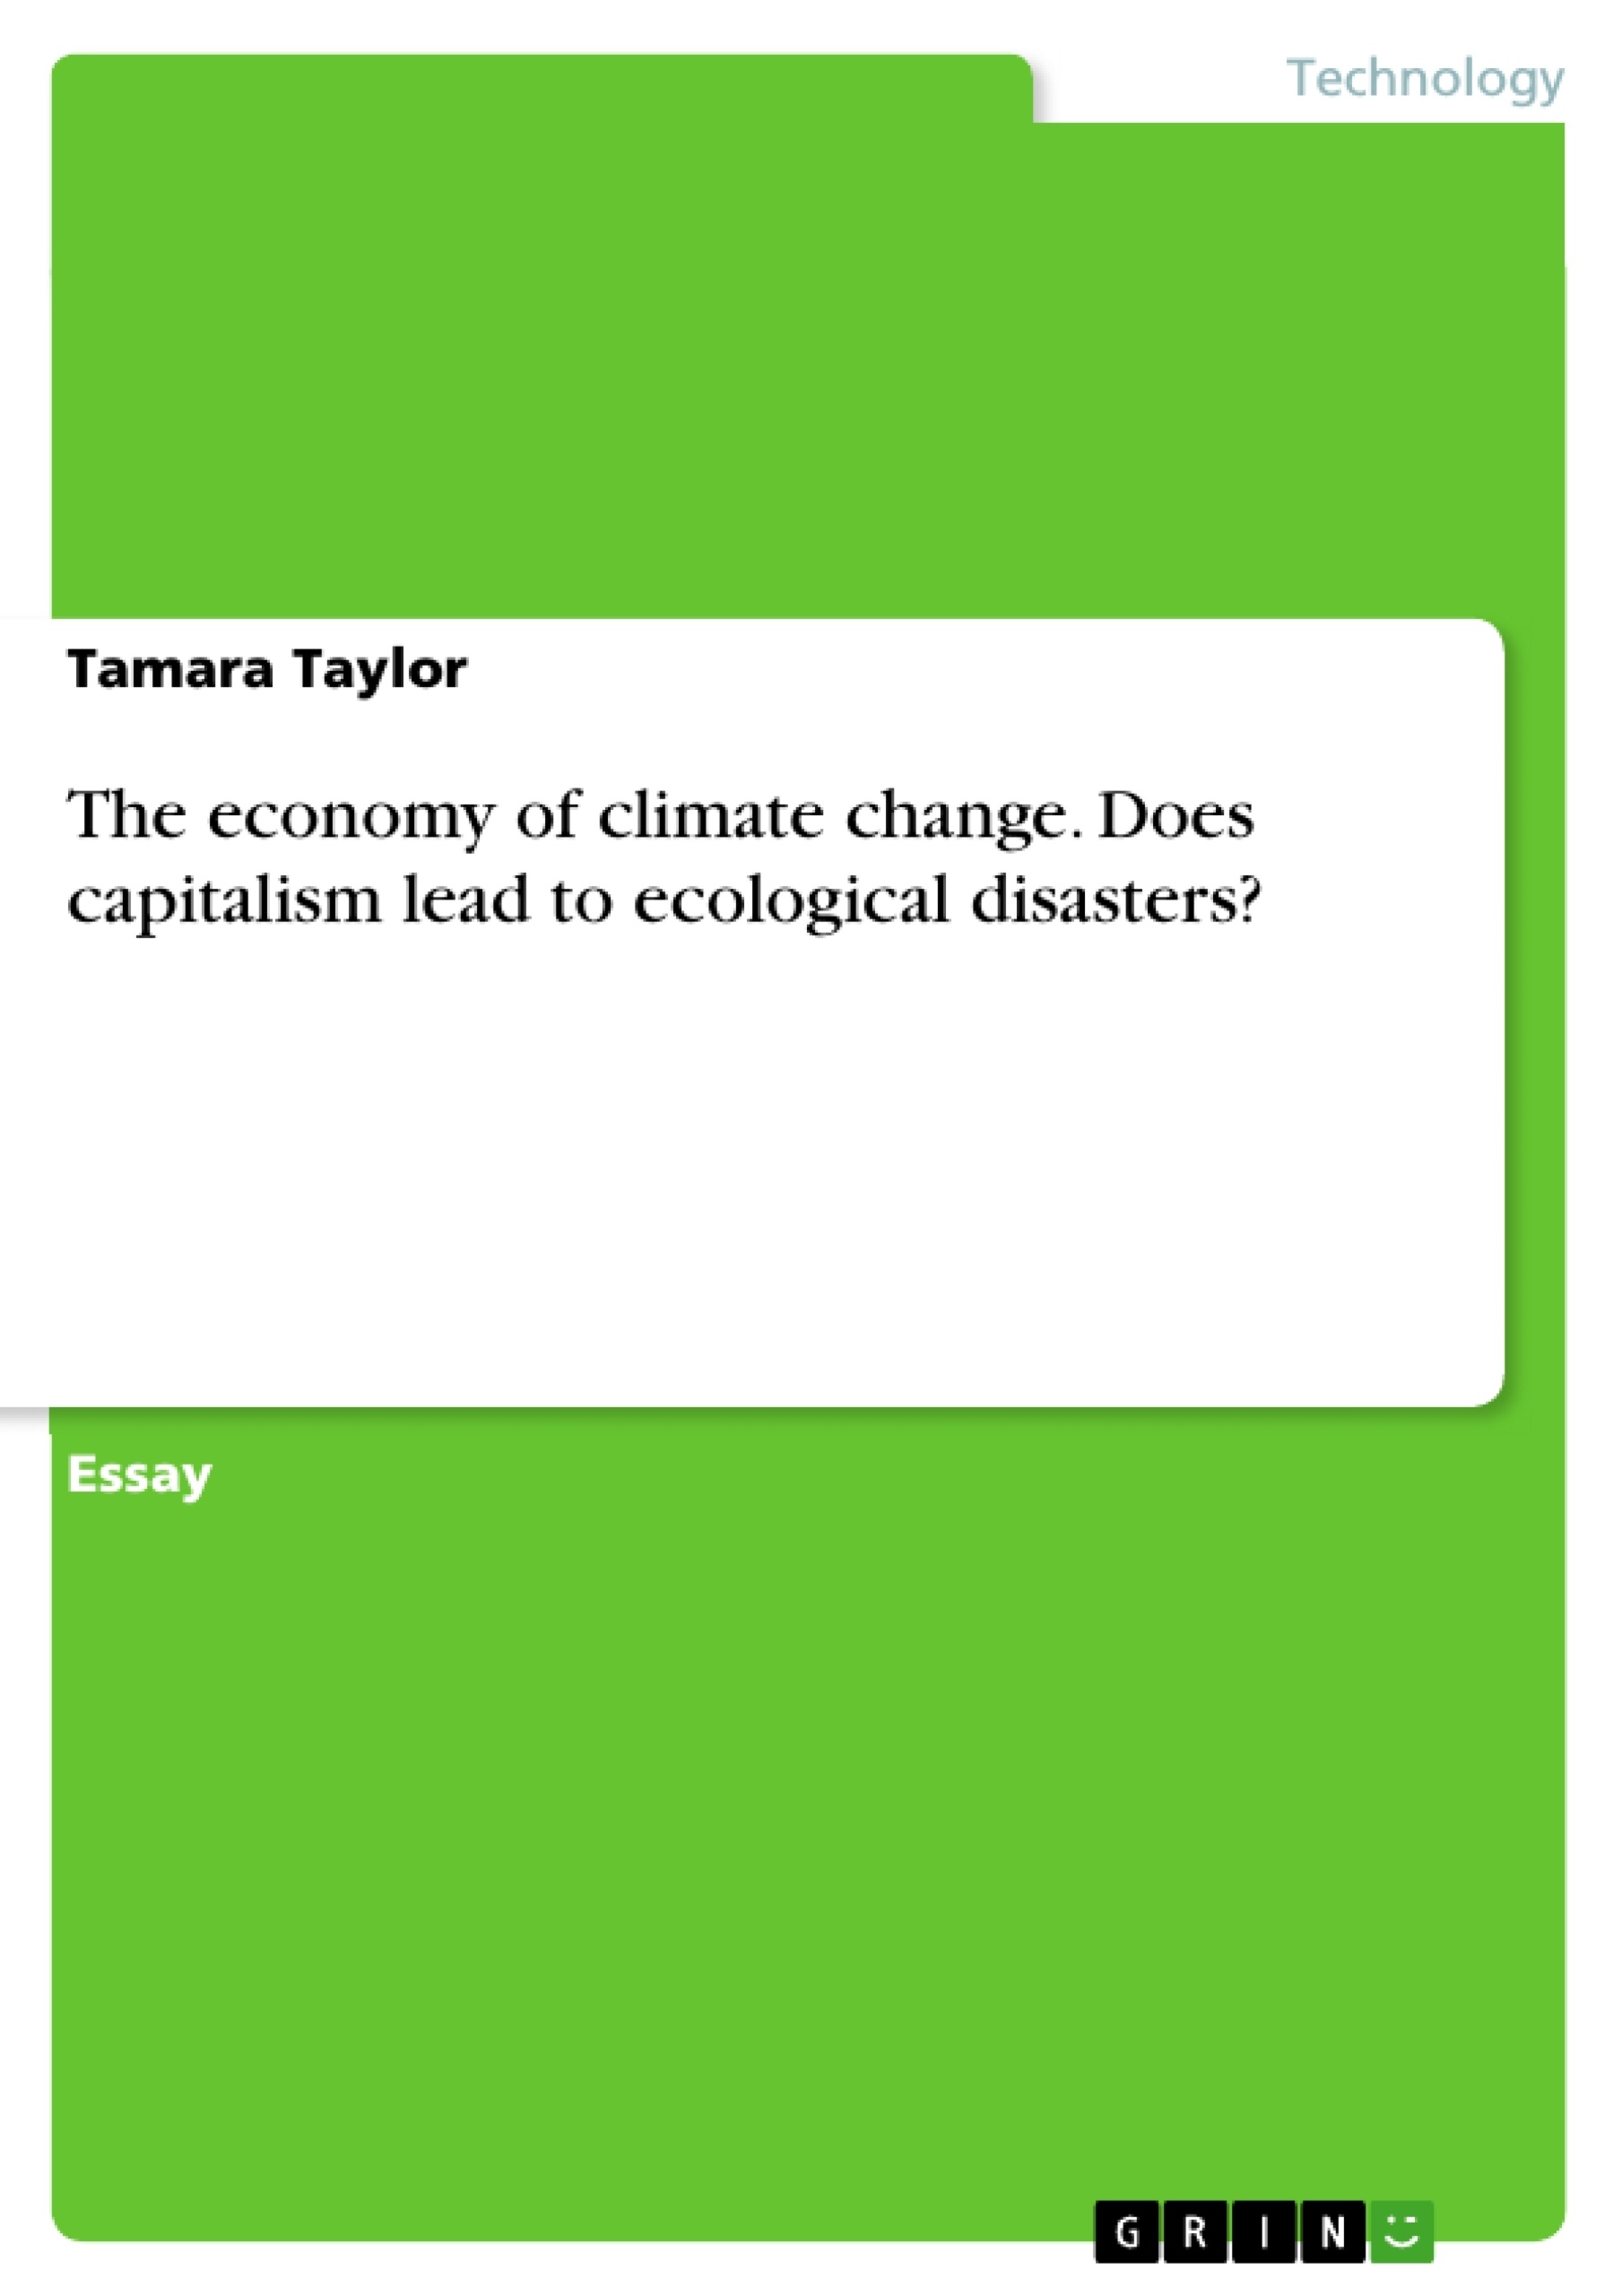 Título: The economy of climate change. Does capitalism lead to ecological disasters?